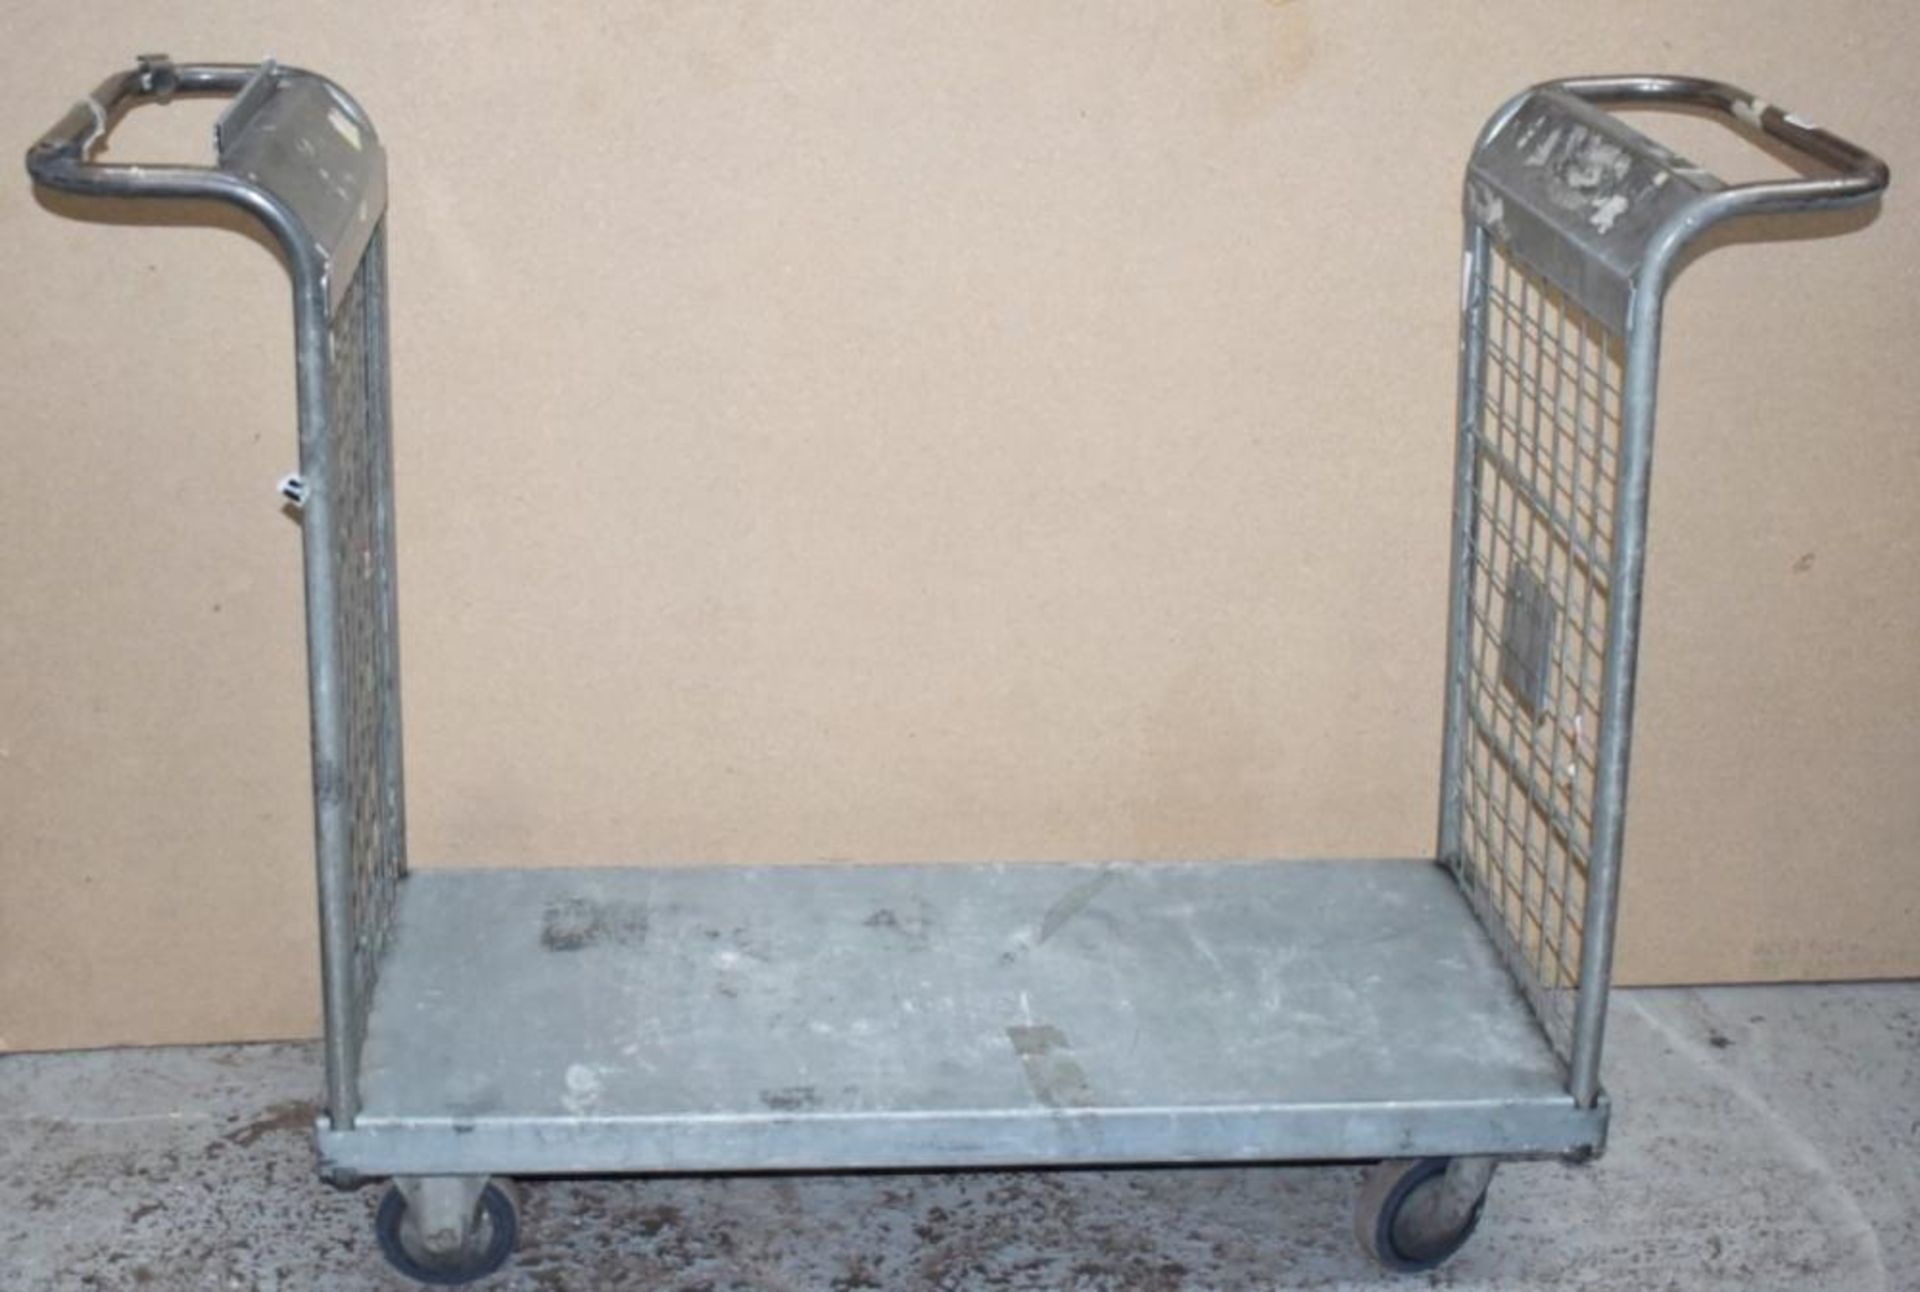 1 x Platform Trolley With Heavy Duty Wheels, Two Handles and Waste Bag Holder - Features a 100 x 46 - Image 5 of 6